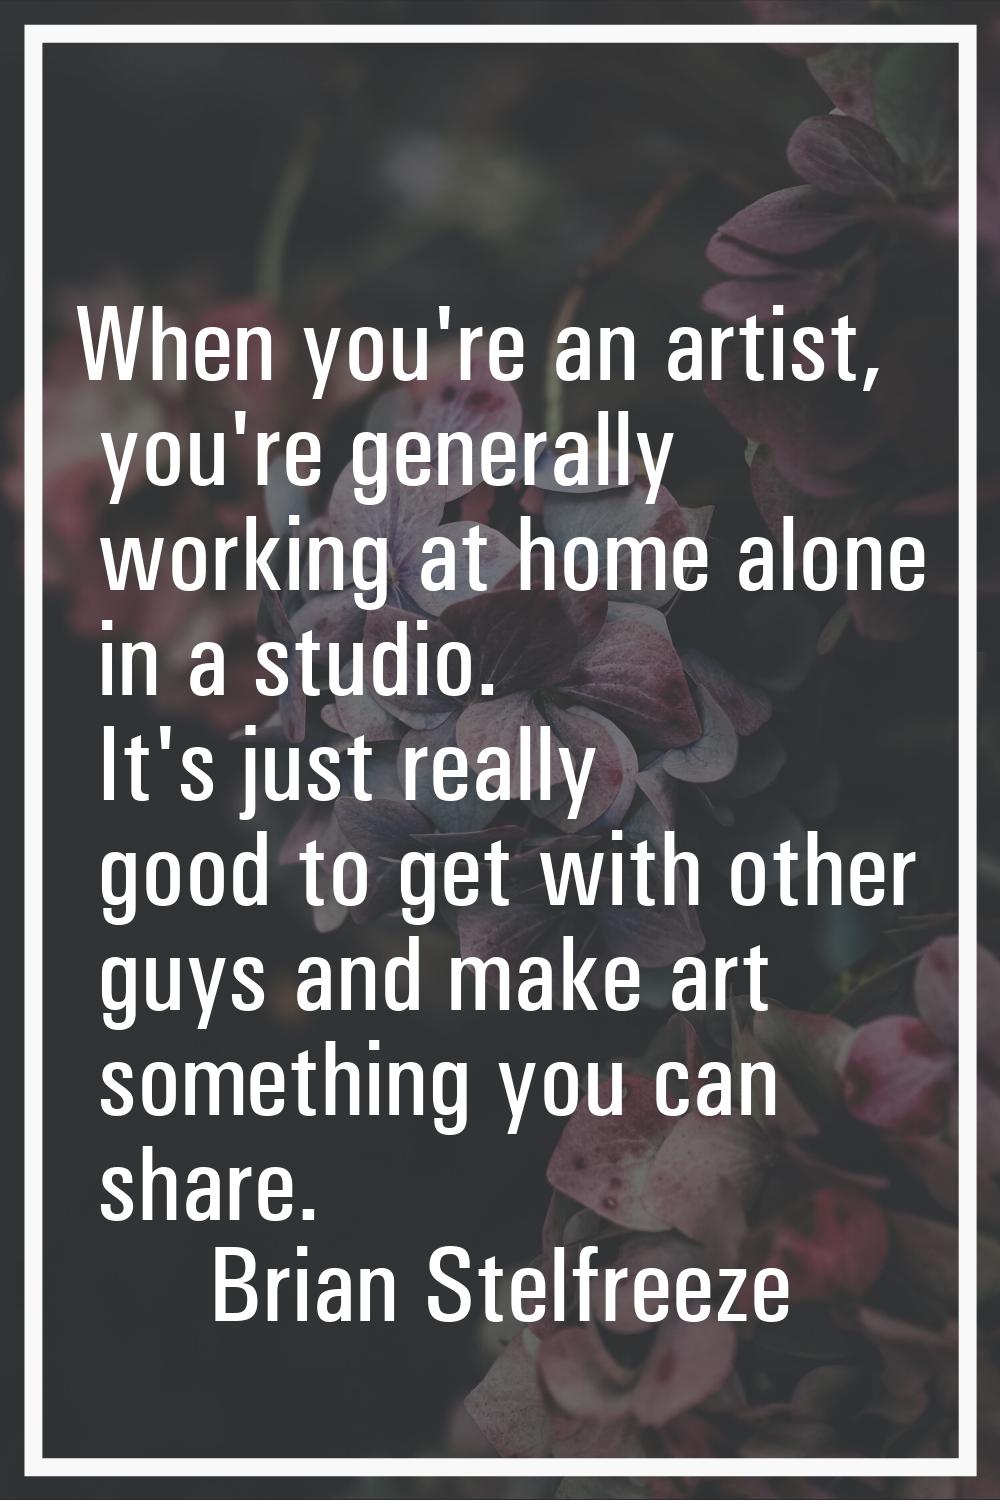 When you're an artist, you're generally working at home alone in a studio. It's just really good to